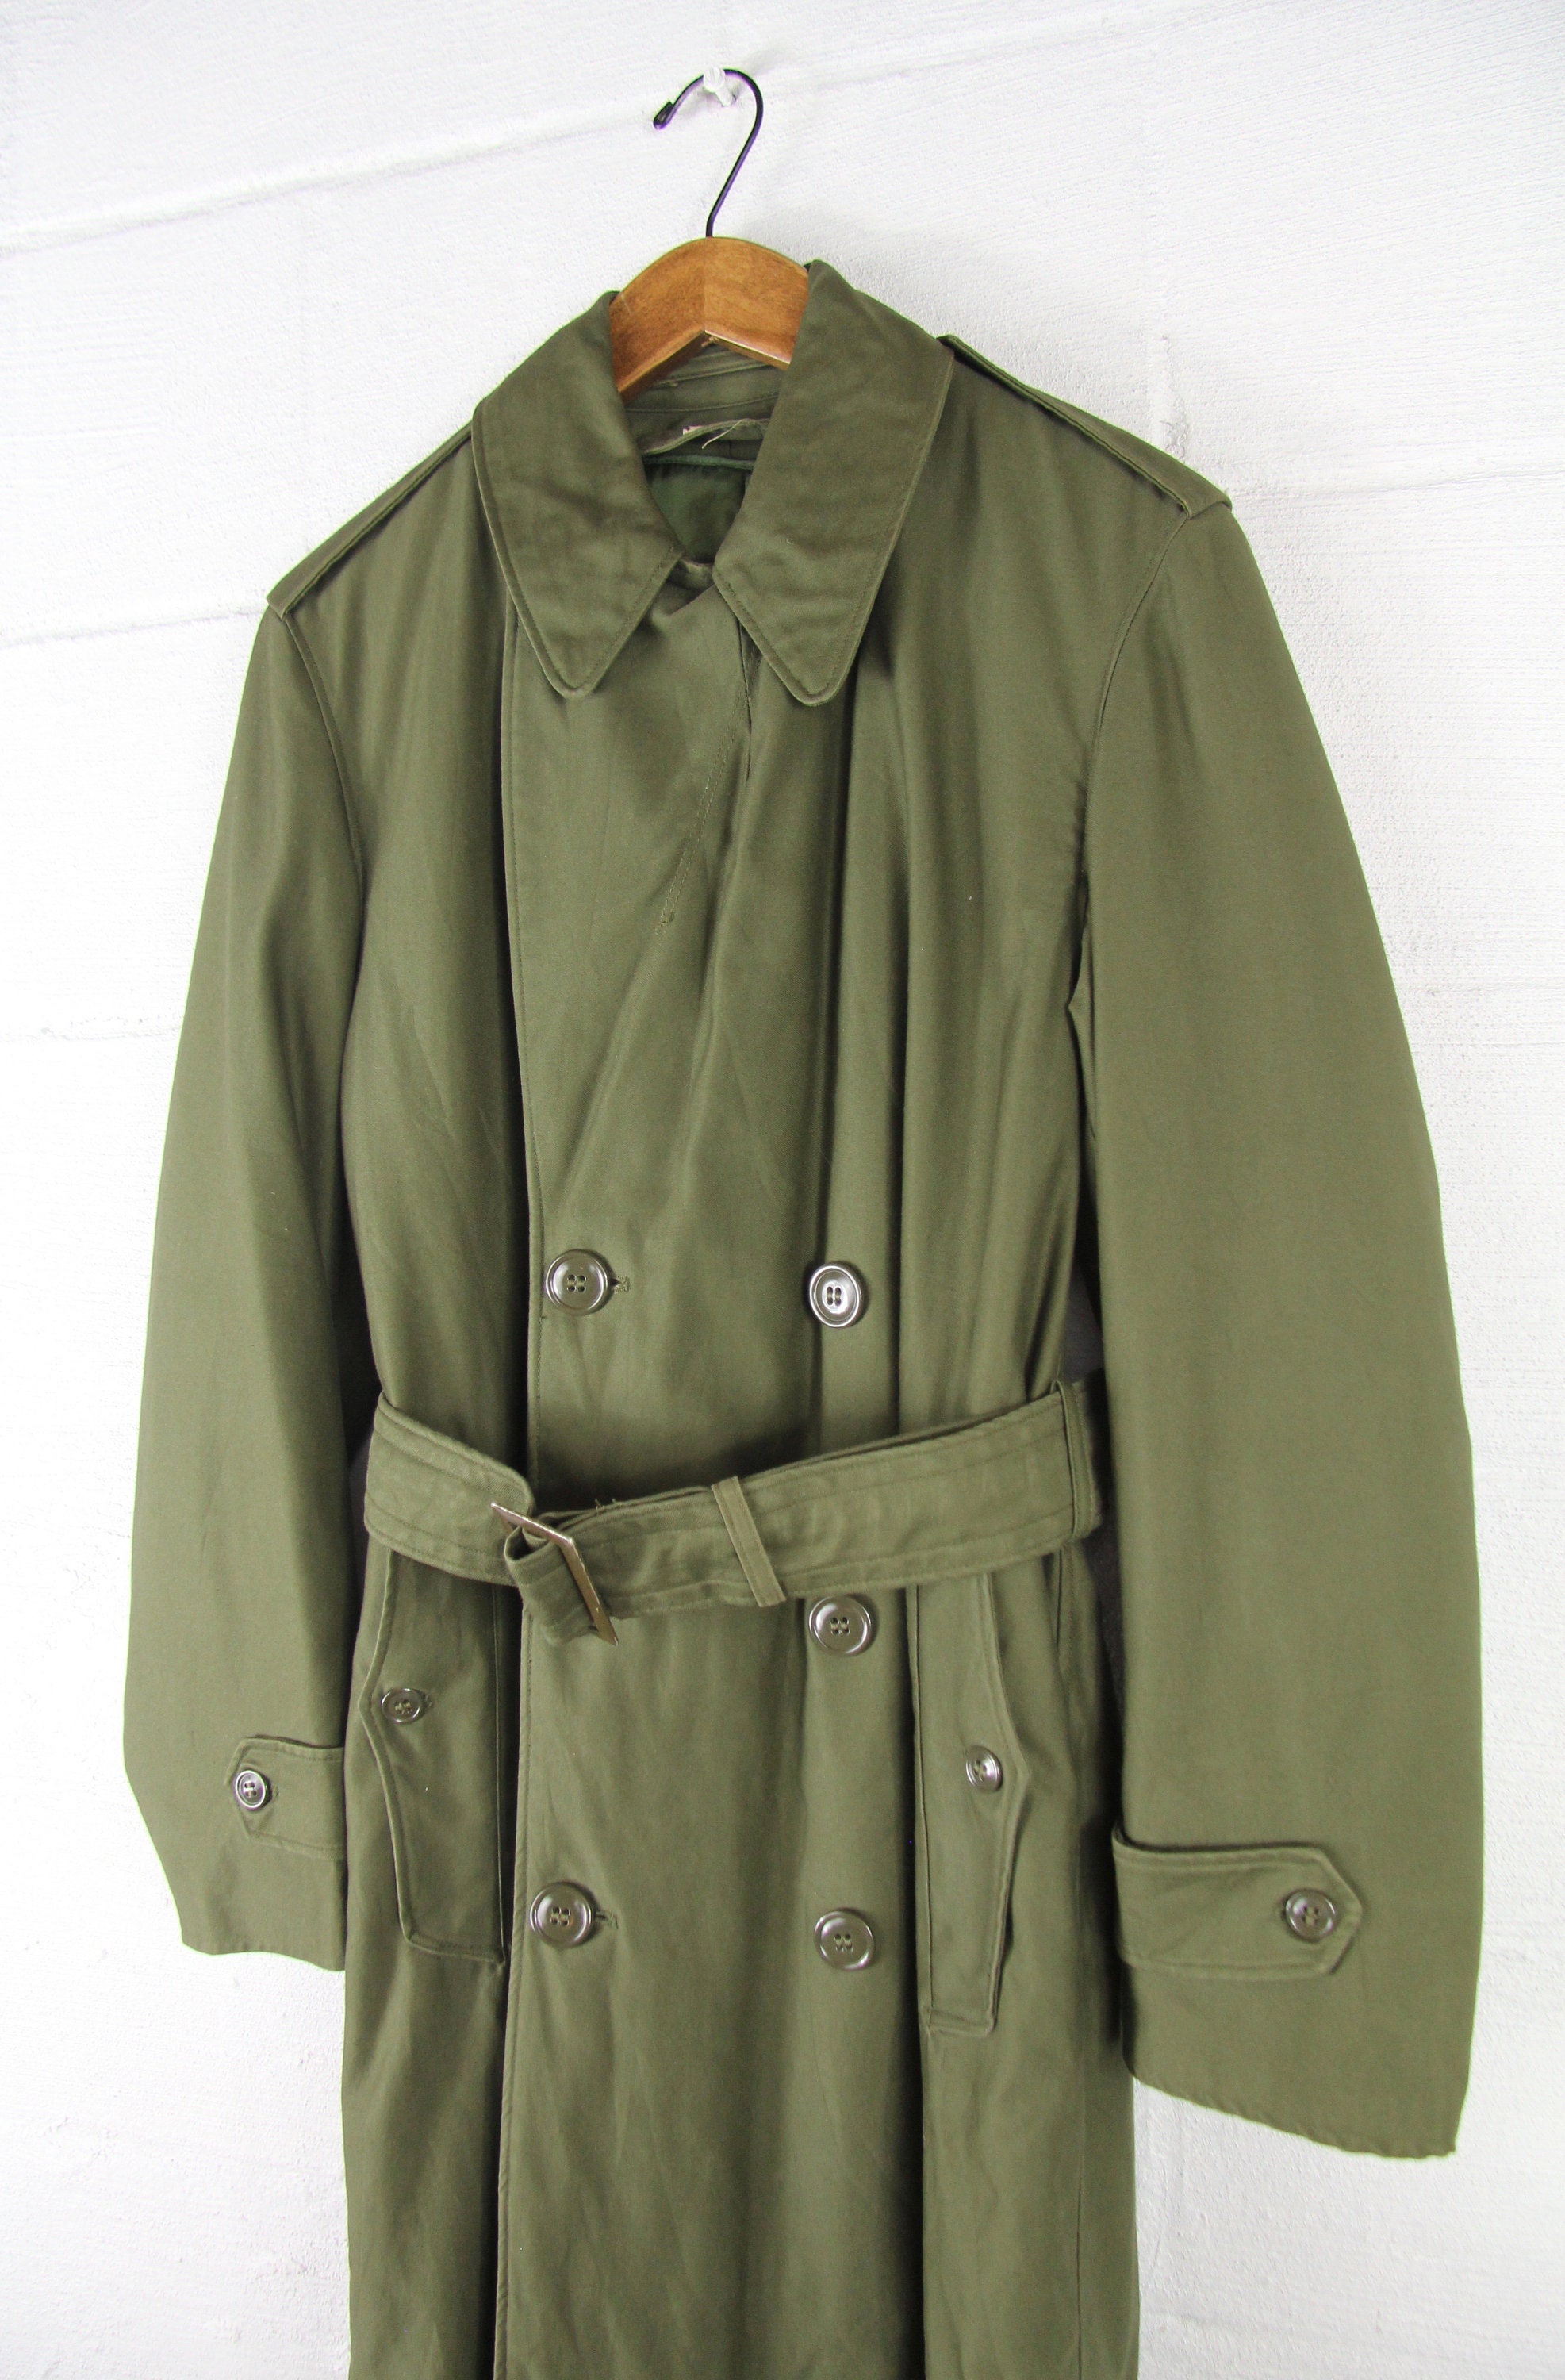 LINED Military Trench Coat Vietnam Army Green Thick Heavy Vintage ...